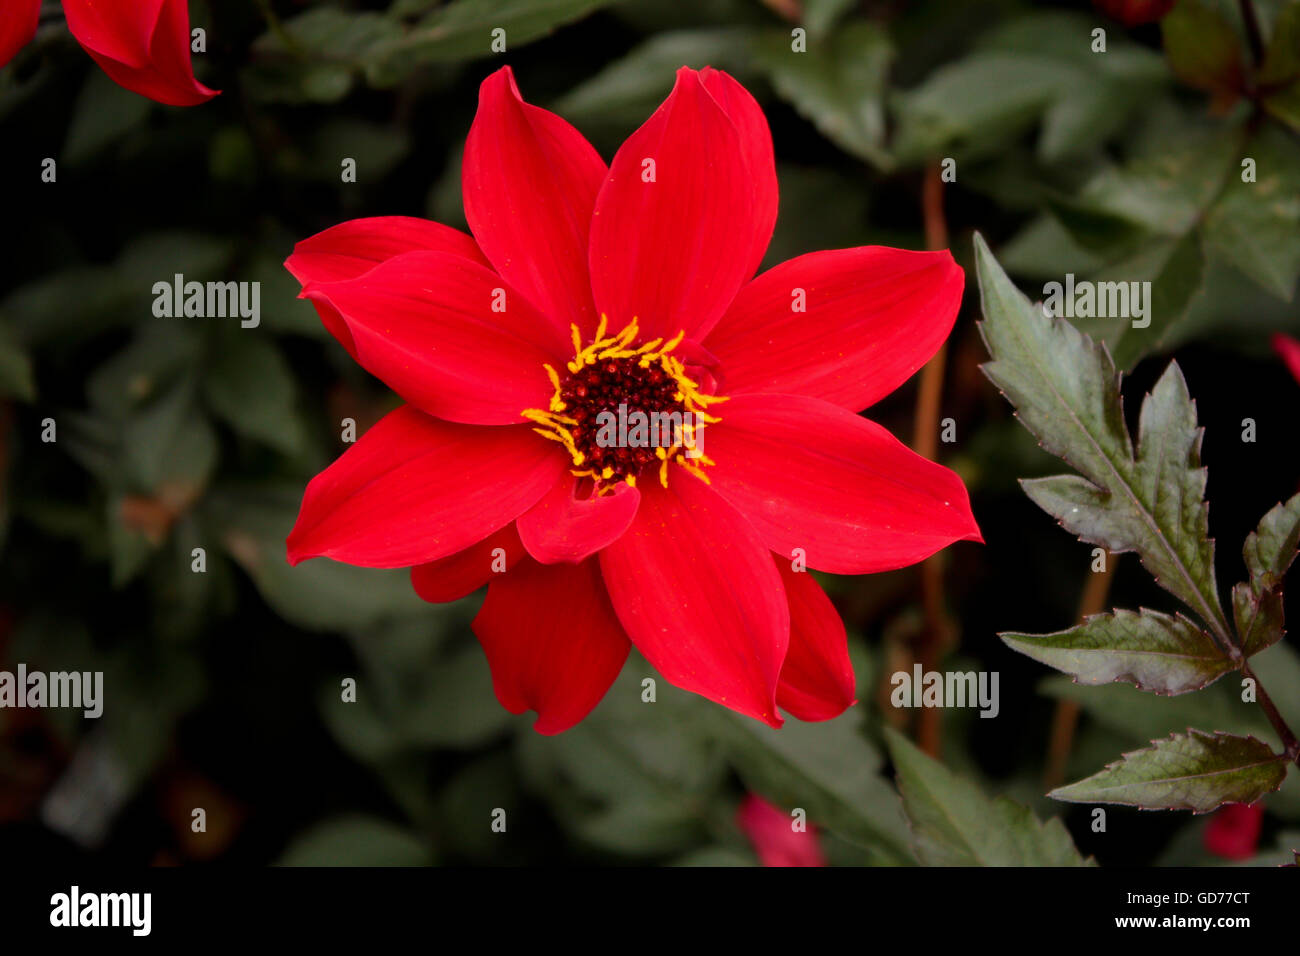 Red blood flower in a London Park Stock Photo